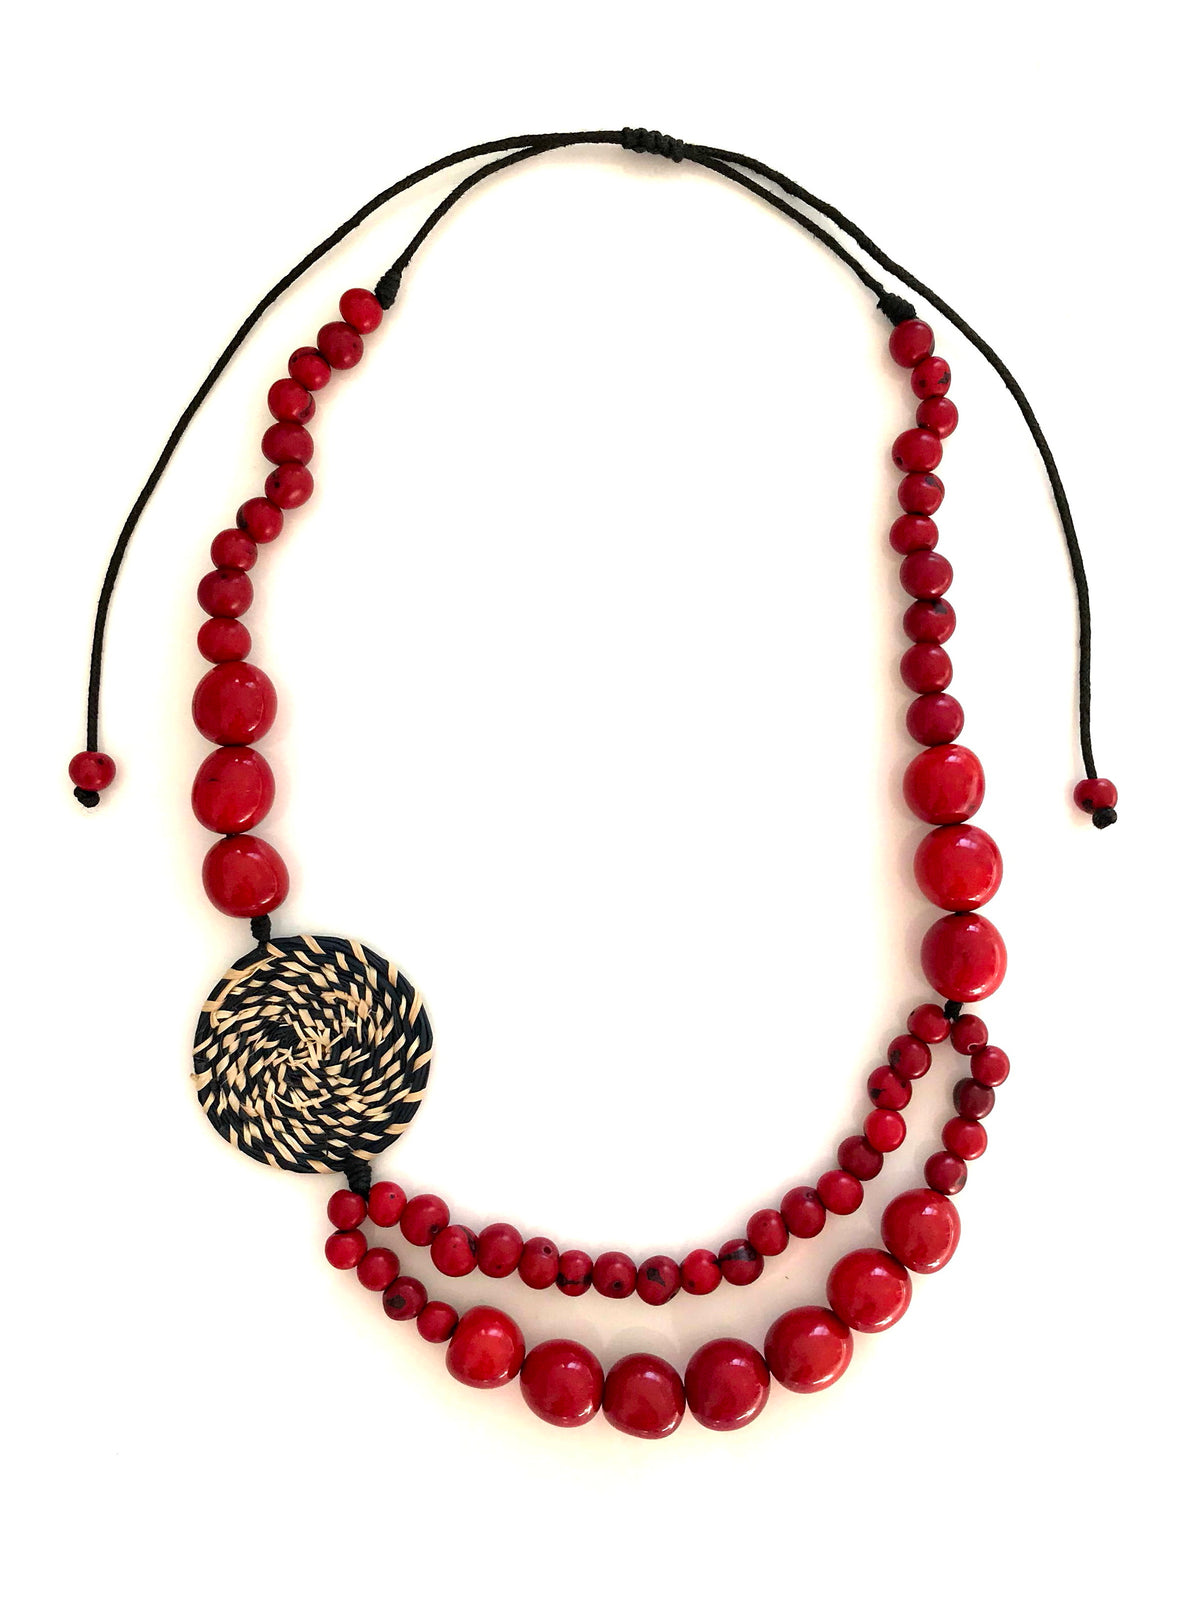 Trilogy necklace - Red